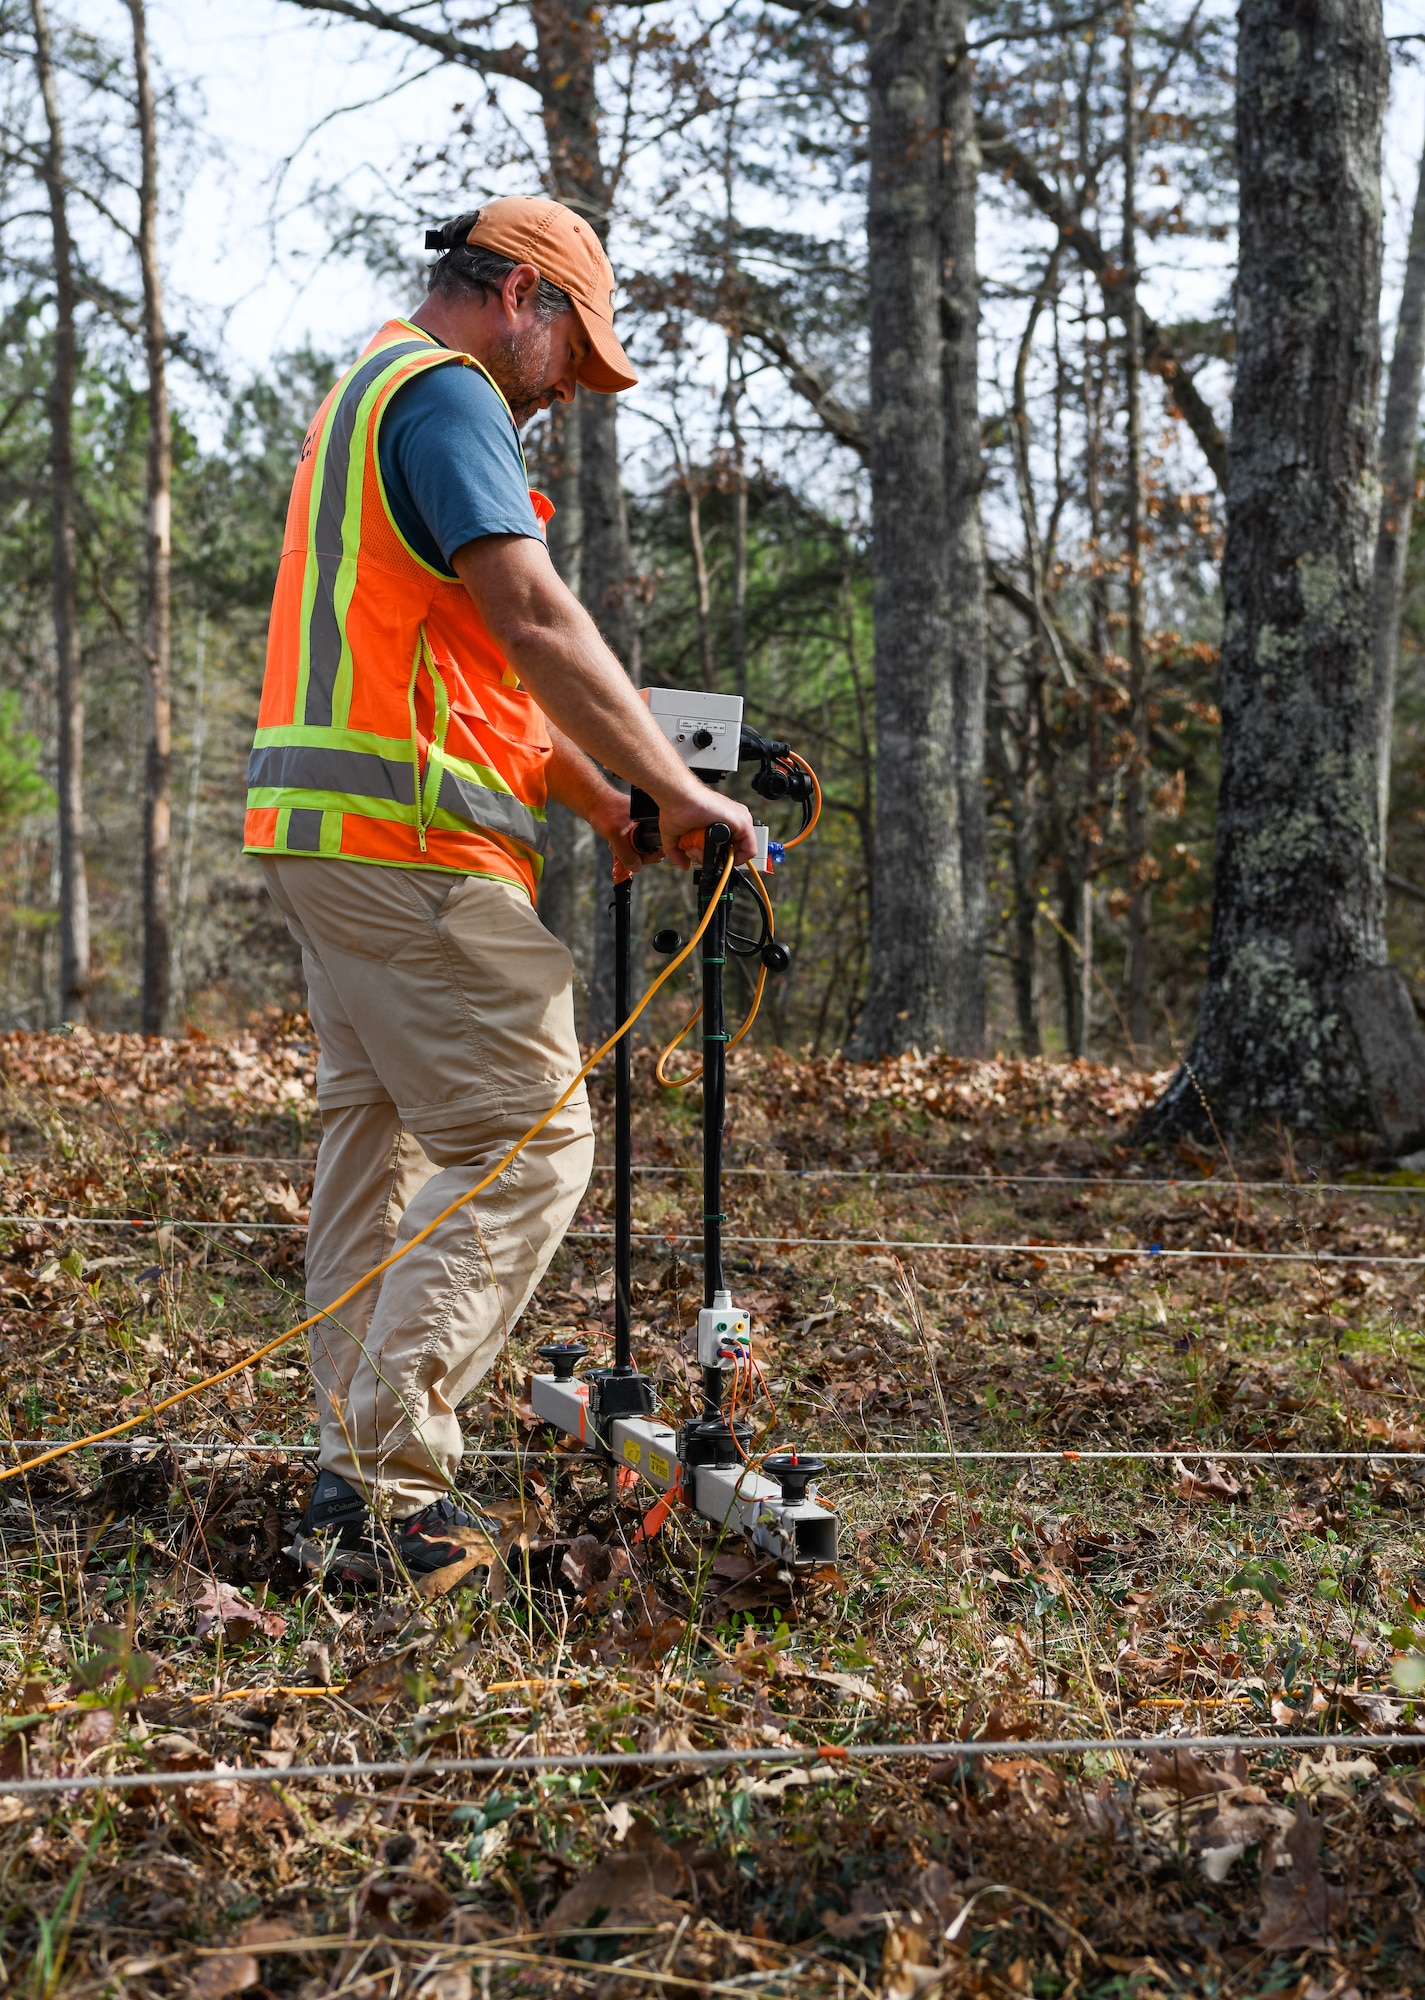 Steve Martin, an archaeologist who specializes in geophysics, uses an electrical resistance meter to survey the Chapel Hill Cemetery at Arnold Air Force Base, Tennessee, Nov. 10, 2022. The survey can help the archaeologists assess what has happened below the surface in an area. This information can then be interpreted to identify possible graves that were never marked or the markers are no longer in place. (U.S. Air Force photo by Jill Pickett)